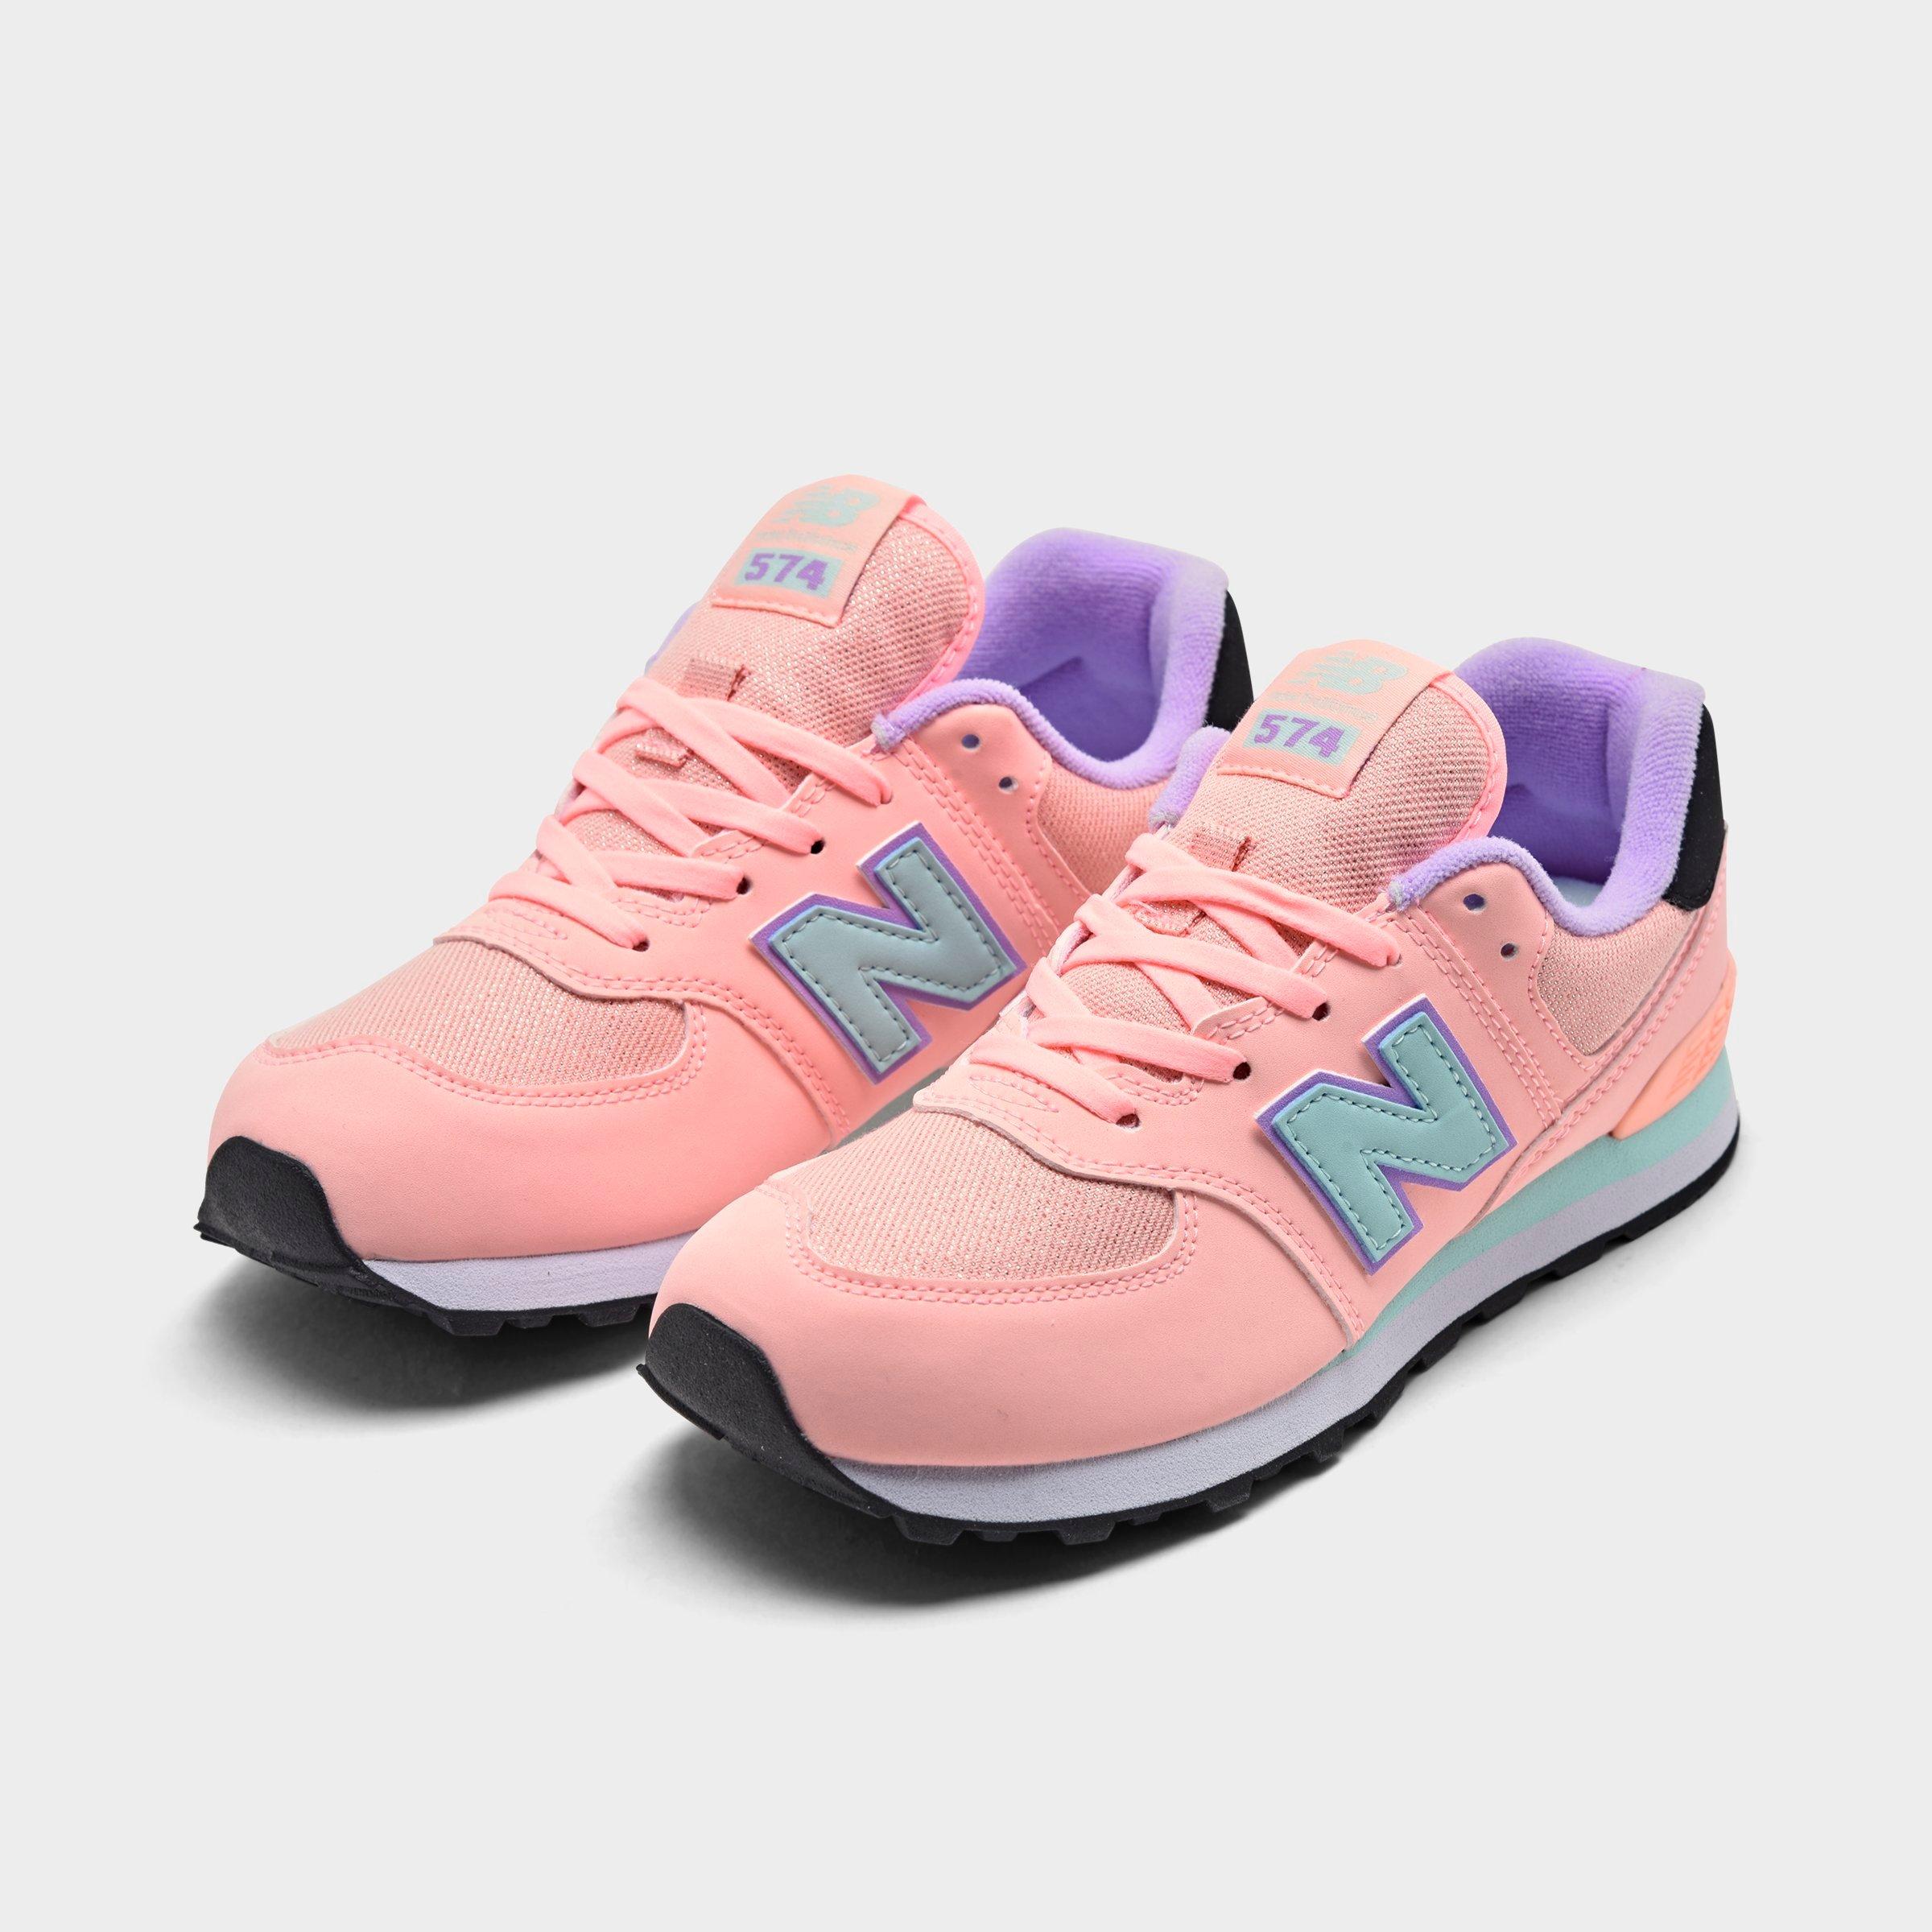 New Balance 574 Casual Shoes 